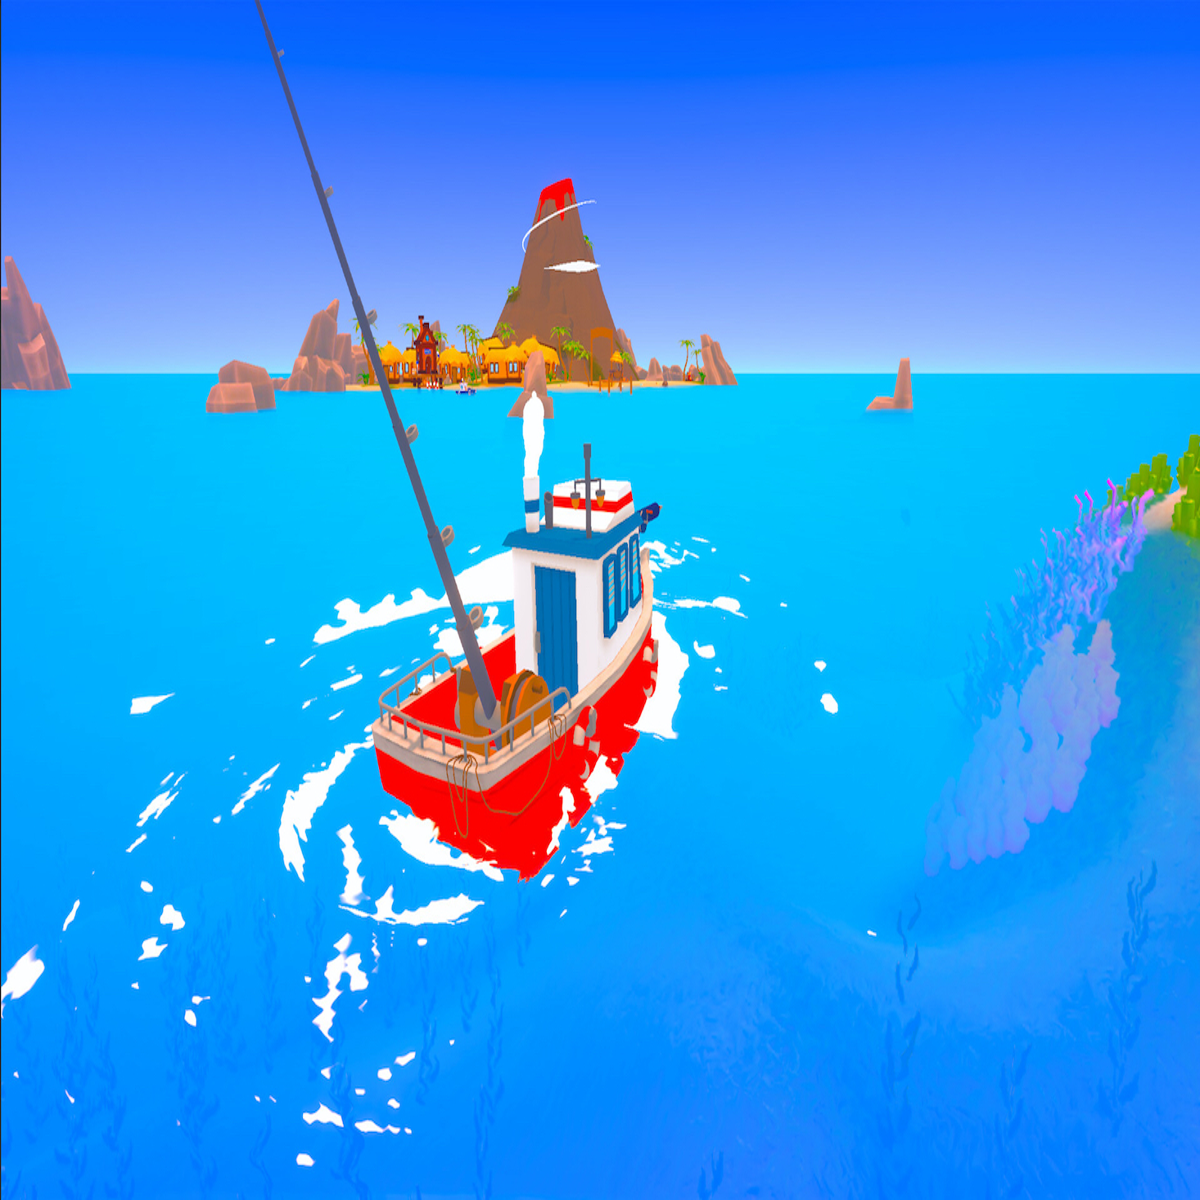 Chill fishing sim Catch & Cook looks a lot like Dredge without the spooky  undercurrents